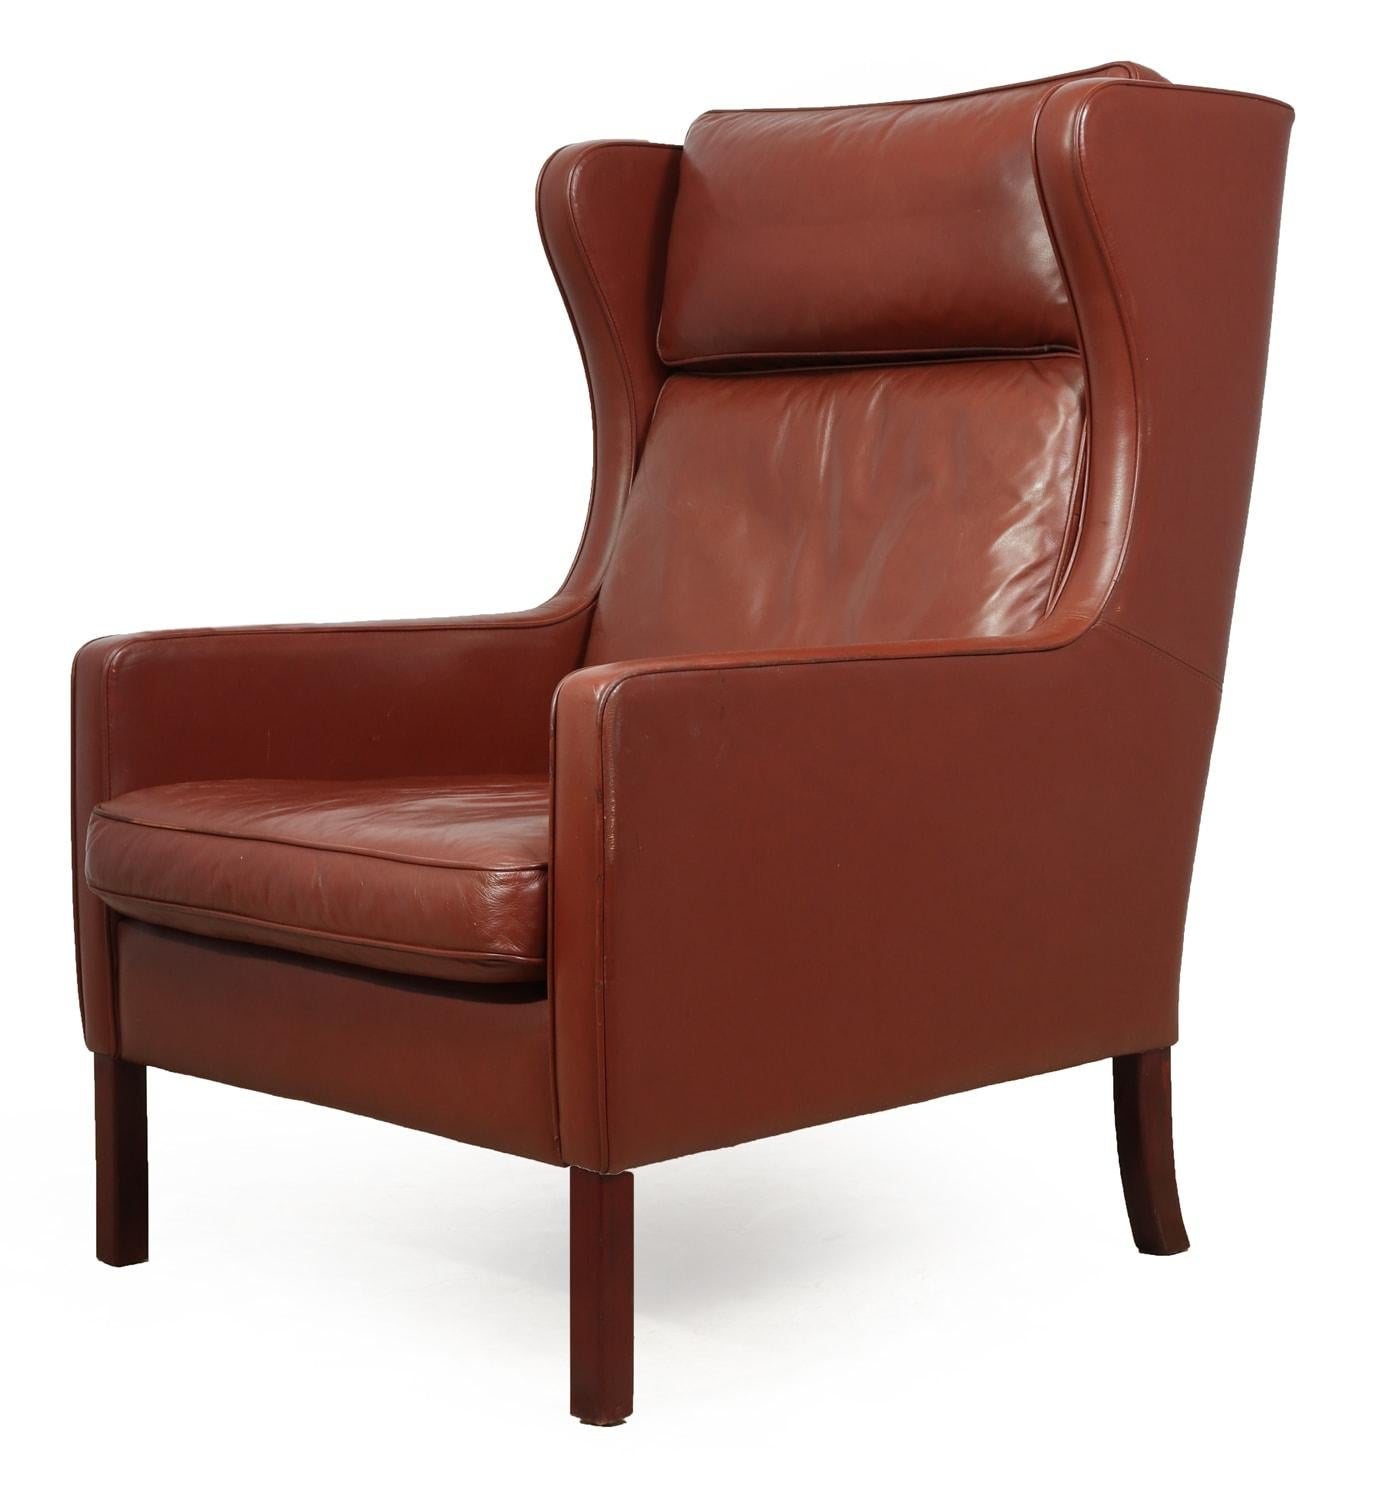 Other Midcentury Danish Leather Wing Chair by Stouby, circa 1970